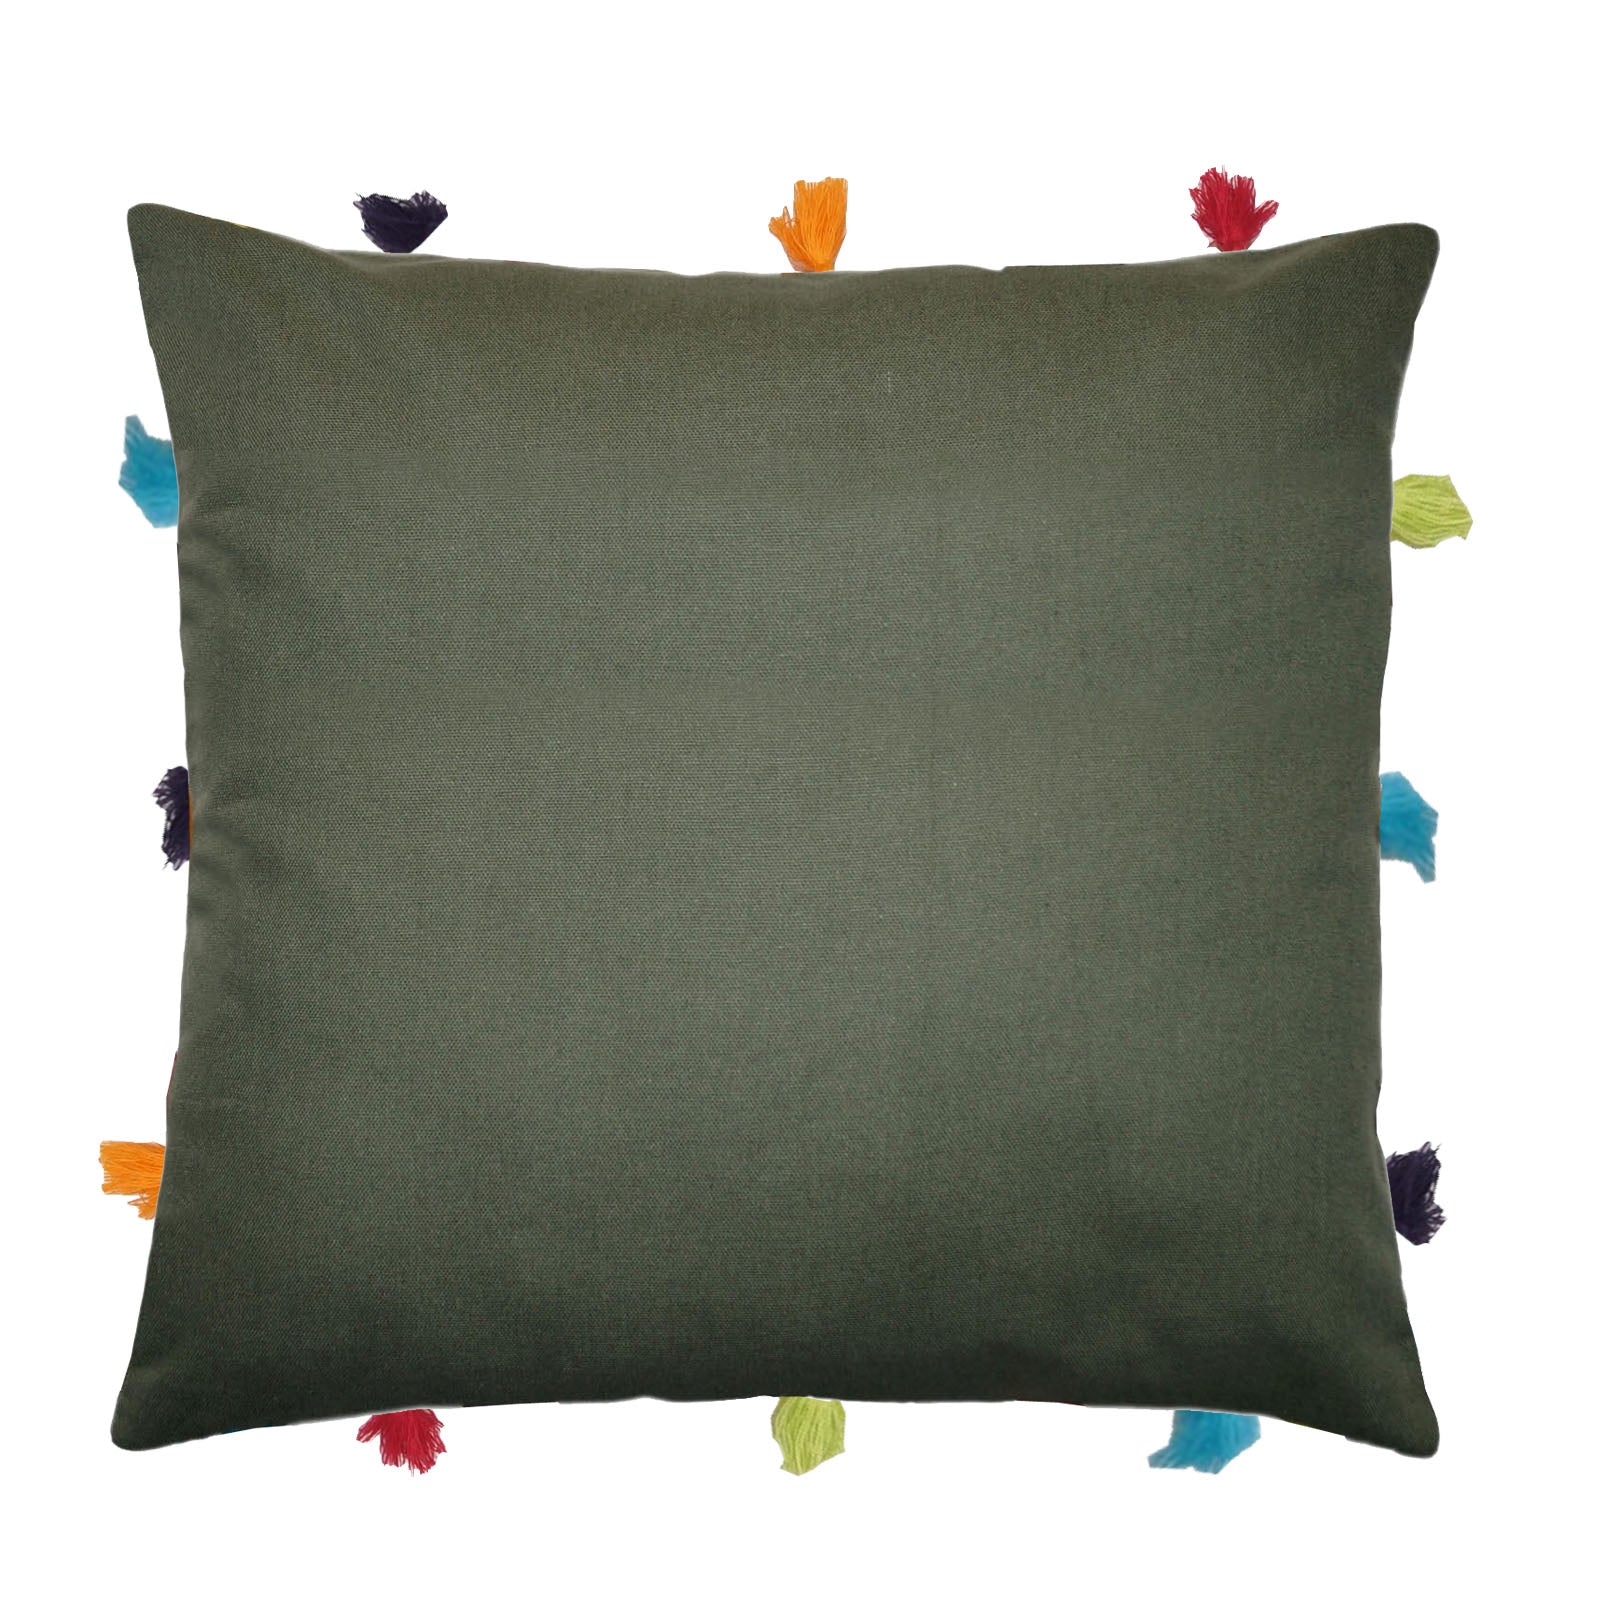 Lushomes cushion cover 12x12, boho cushion covers, sofa pillow cover, cushion covers with tassels, cushion cover with pom pom (12x12 Inches, Set of 1, Olive Green)